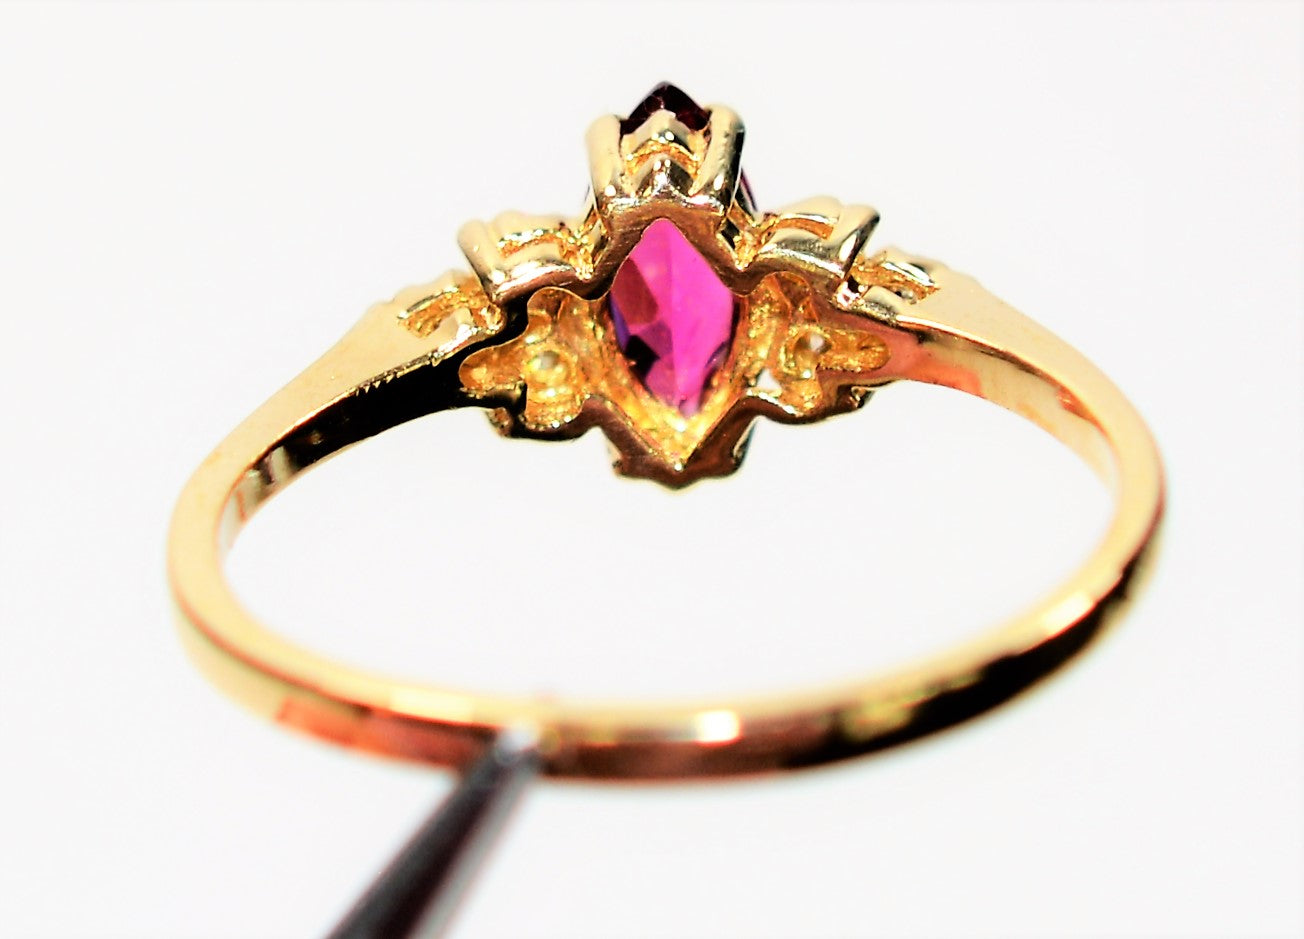 Natural Ruby & Diamond Ring 14K Solid Gold .69tcw Ruby Ring Marquise Ring Gemstone Ring July Birthstone Engagement Ring Women's Ring Estate